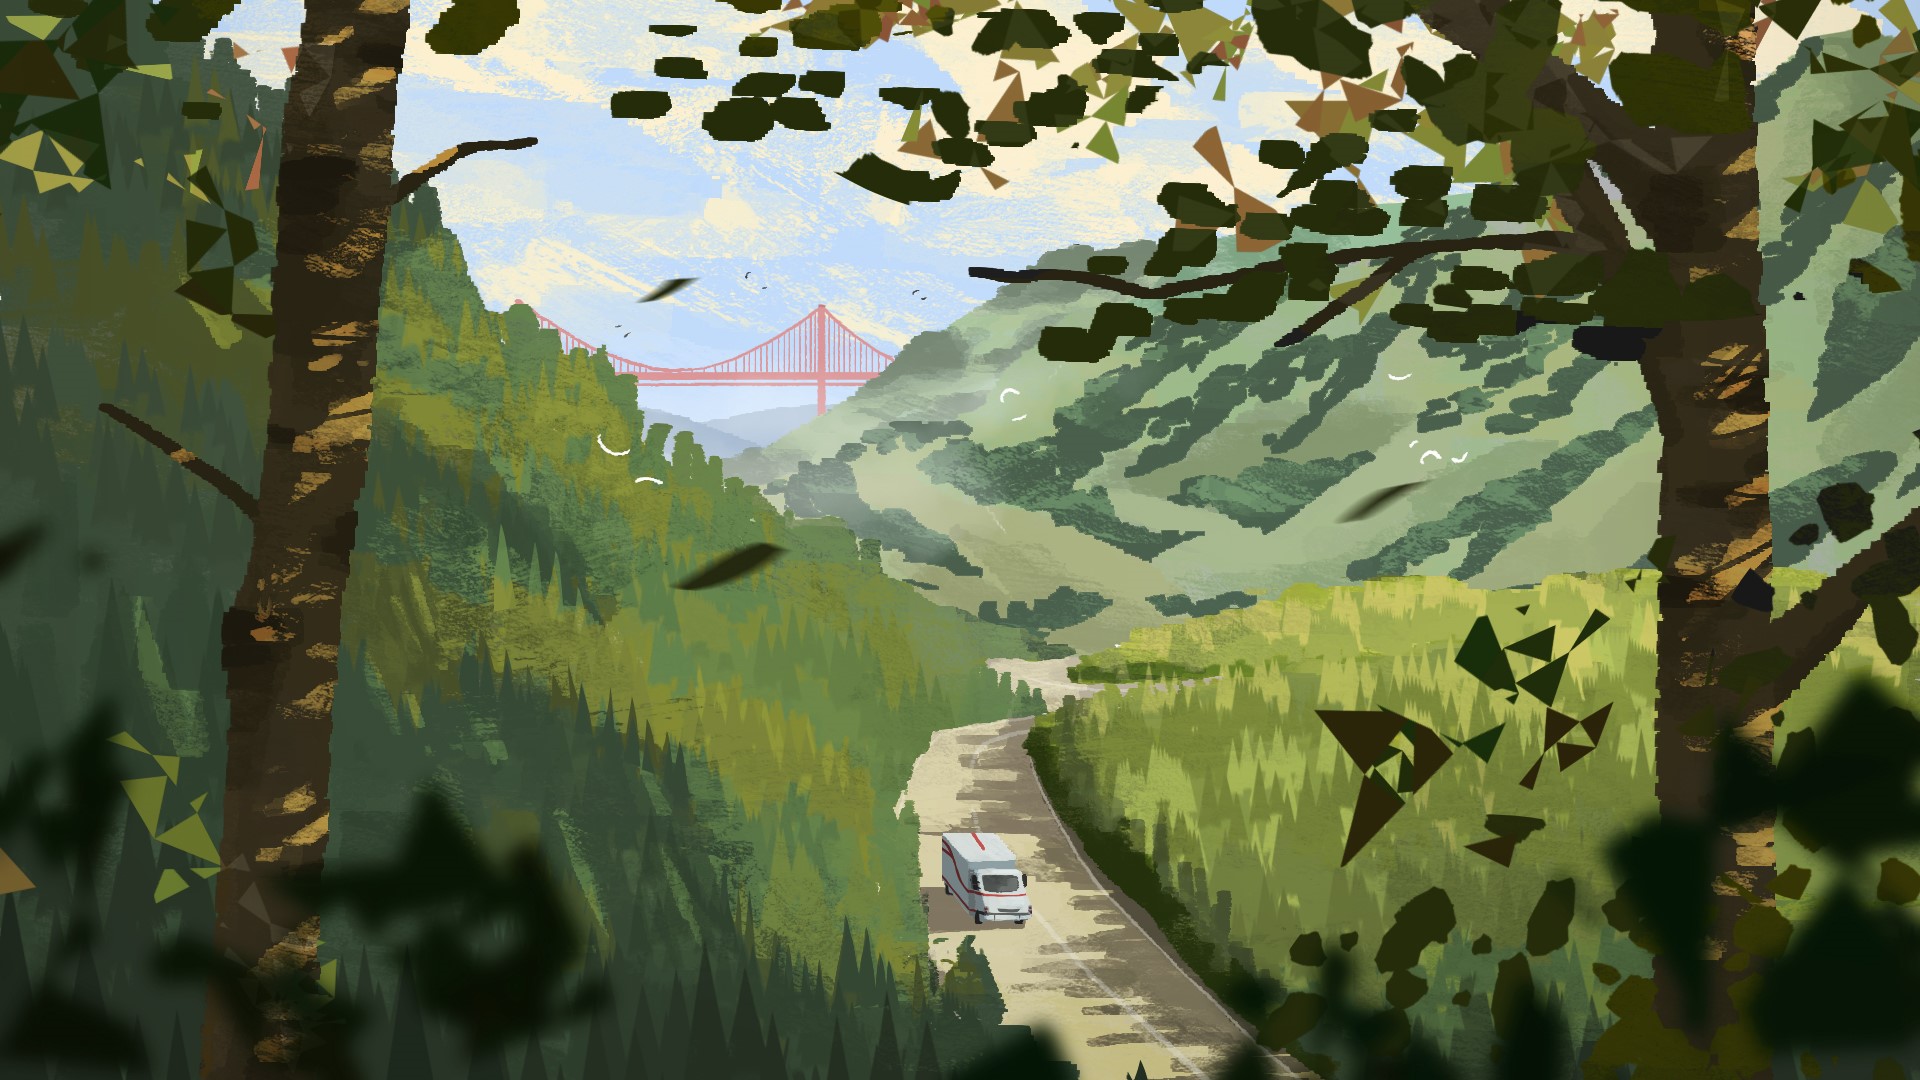 Moving truck driving through a wooded area with the golden gate bridge far in the background